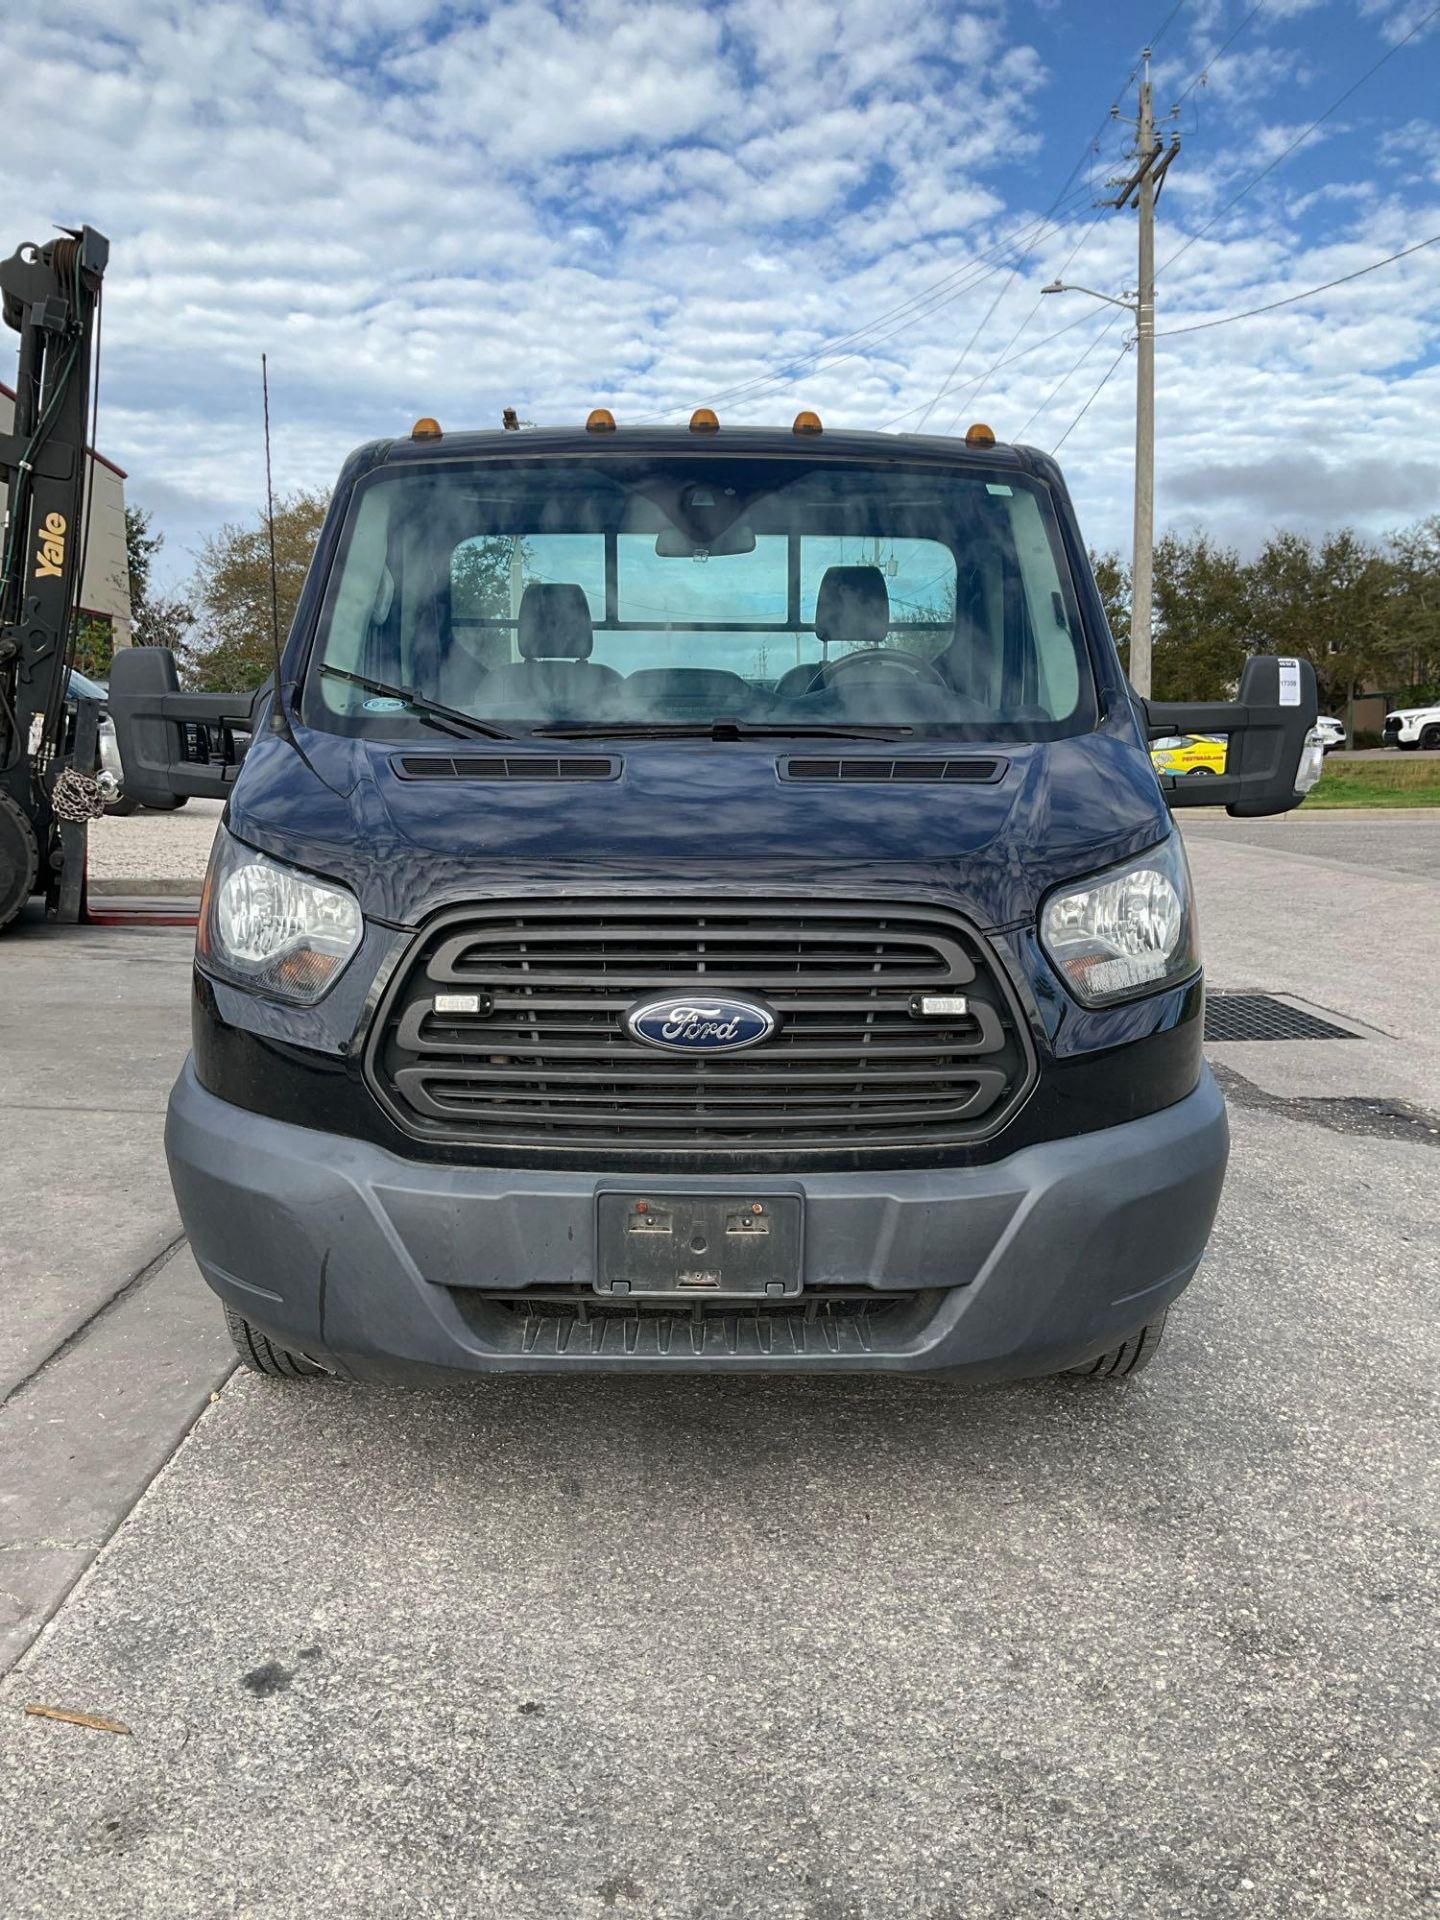 2017 FORD TRANSIT T-350 HD DRW UTILITY TRUCK , GAS POWERED AUTOMATIC, APPROX GVWR 9950LBS, STELLA... - Image 16 of 41